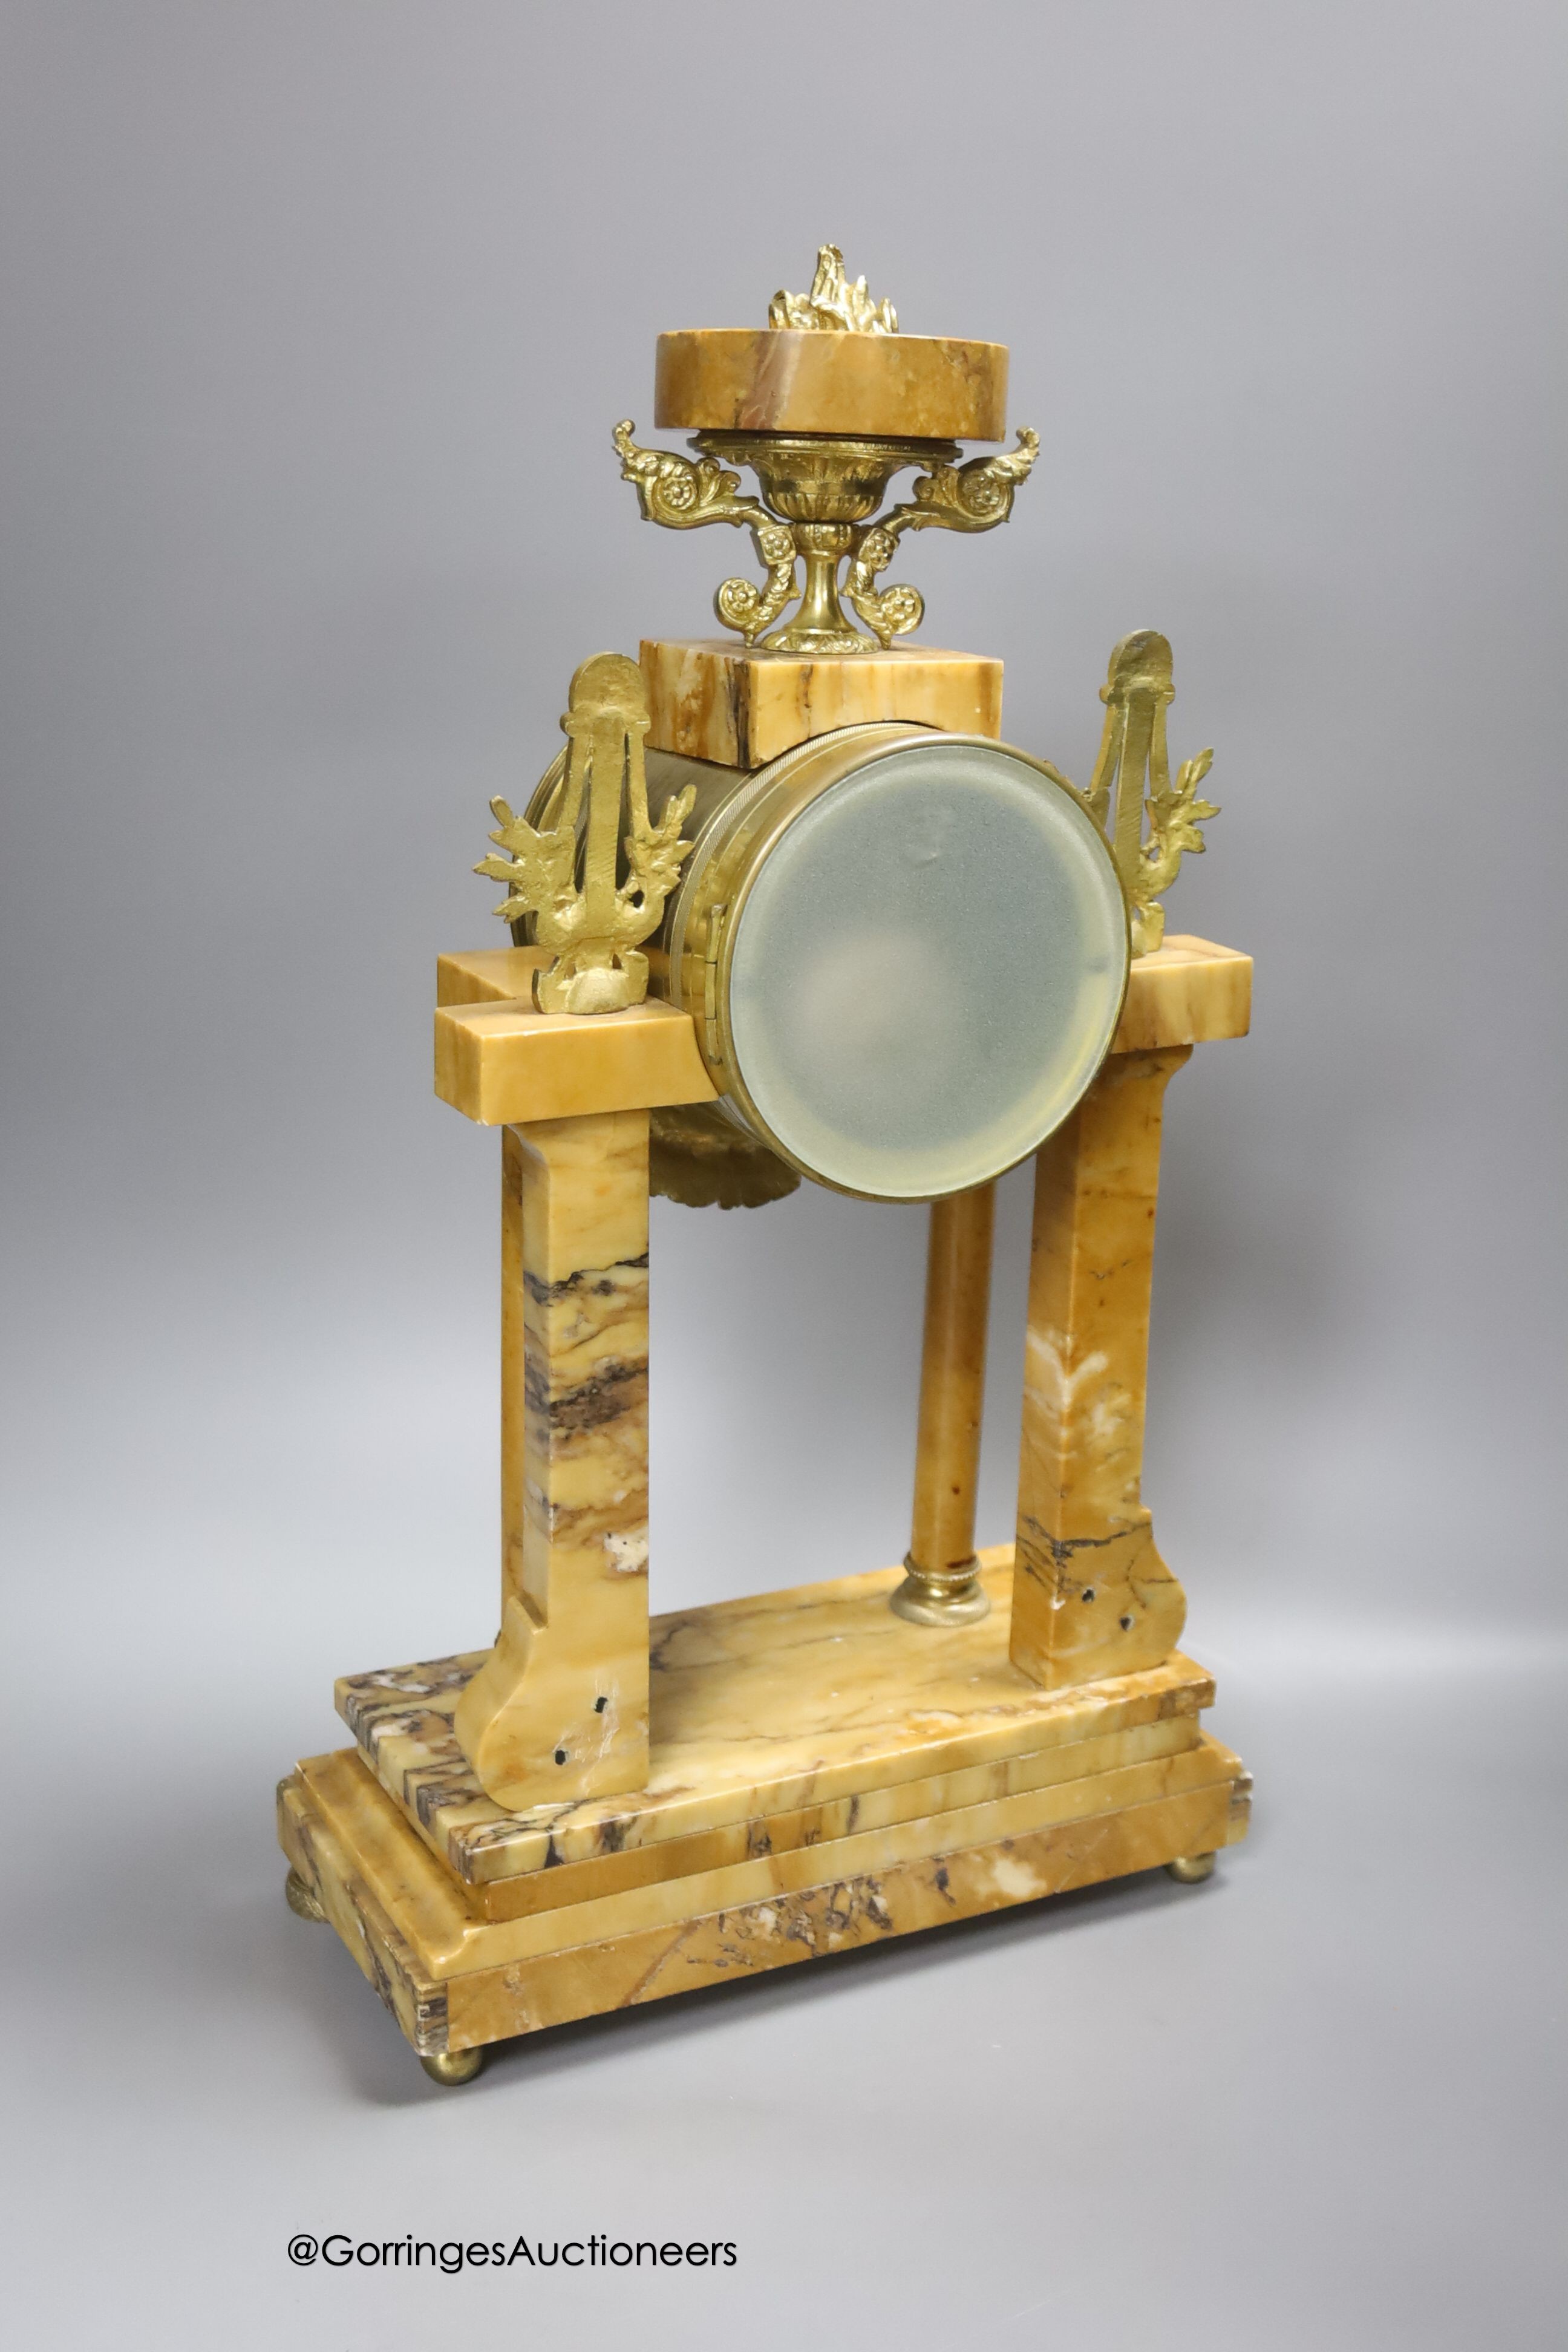 A 19th century French marble and gilt metal mantel clock, with key and pendulum, height 42.5cm - Image 2 of 4